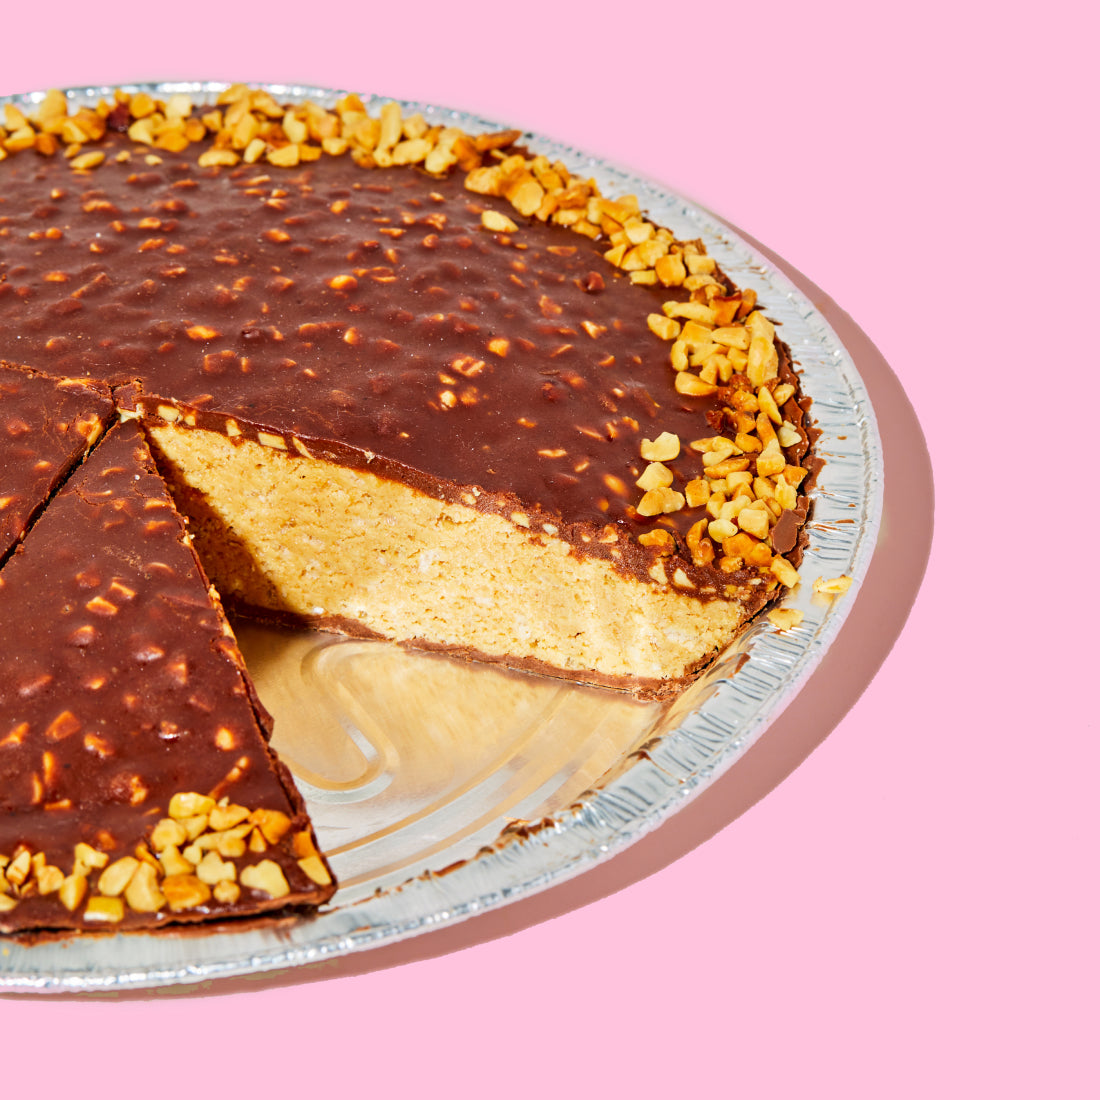 The limited-edition Chocolate Peanut Butter Crunch Pie with a slice removed.